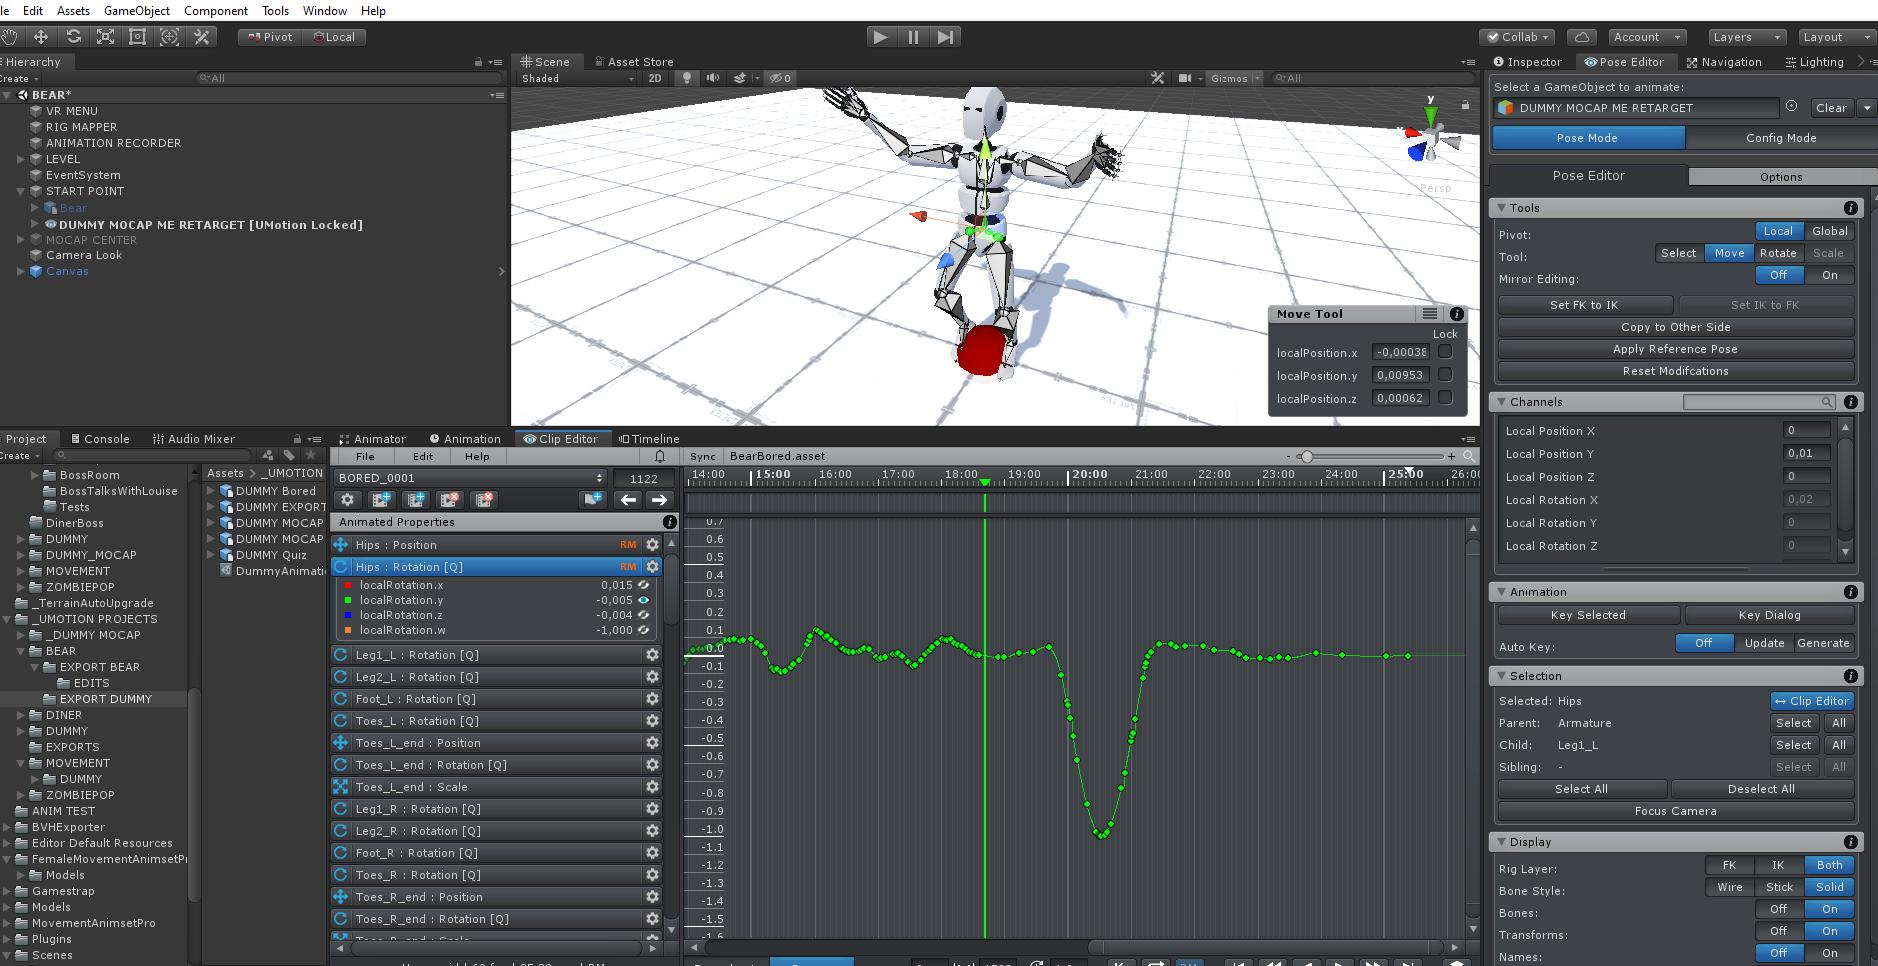 Mirrored rotation curves after FBX Export / UMotion - Animation Editor /  Soxware Interactive